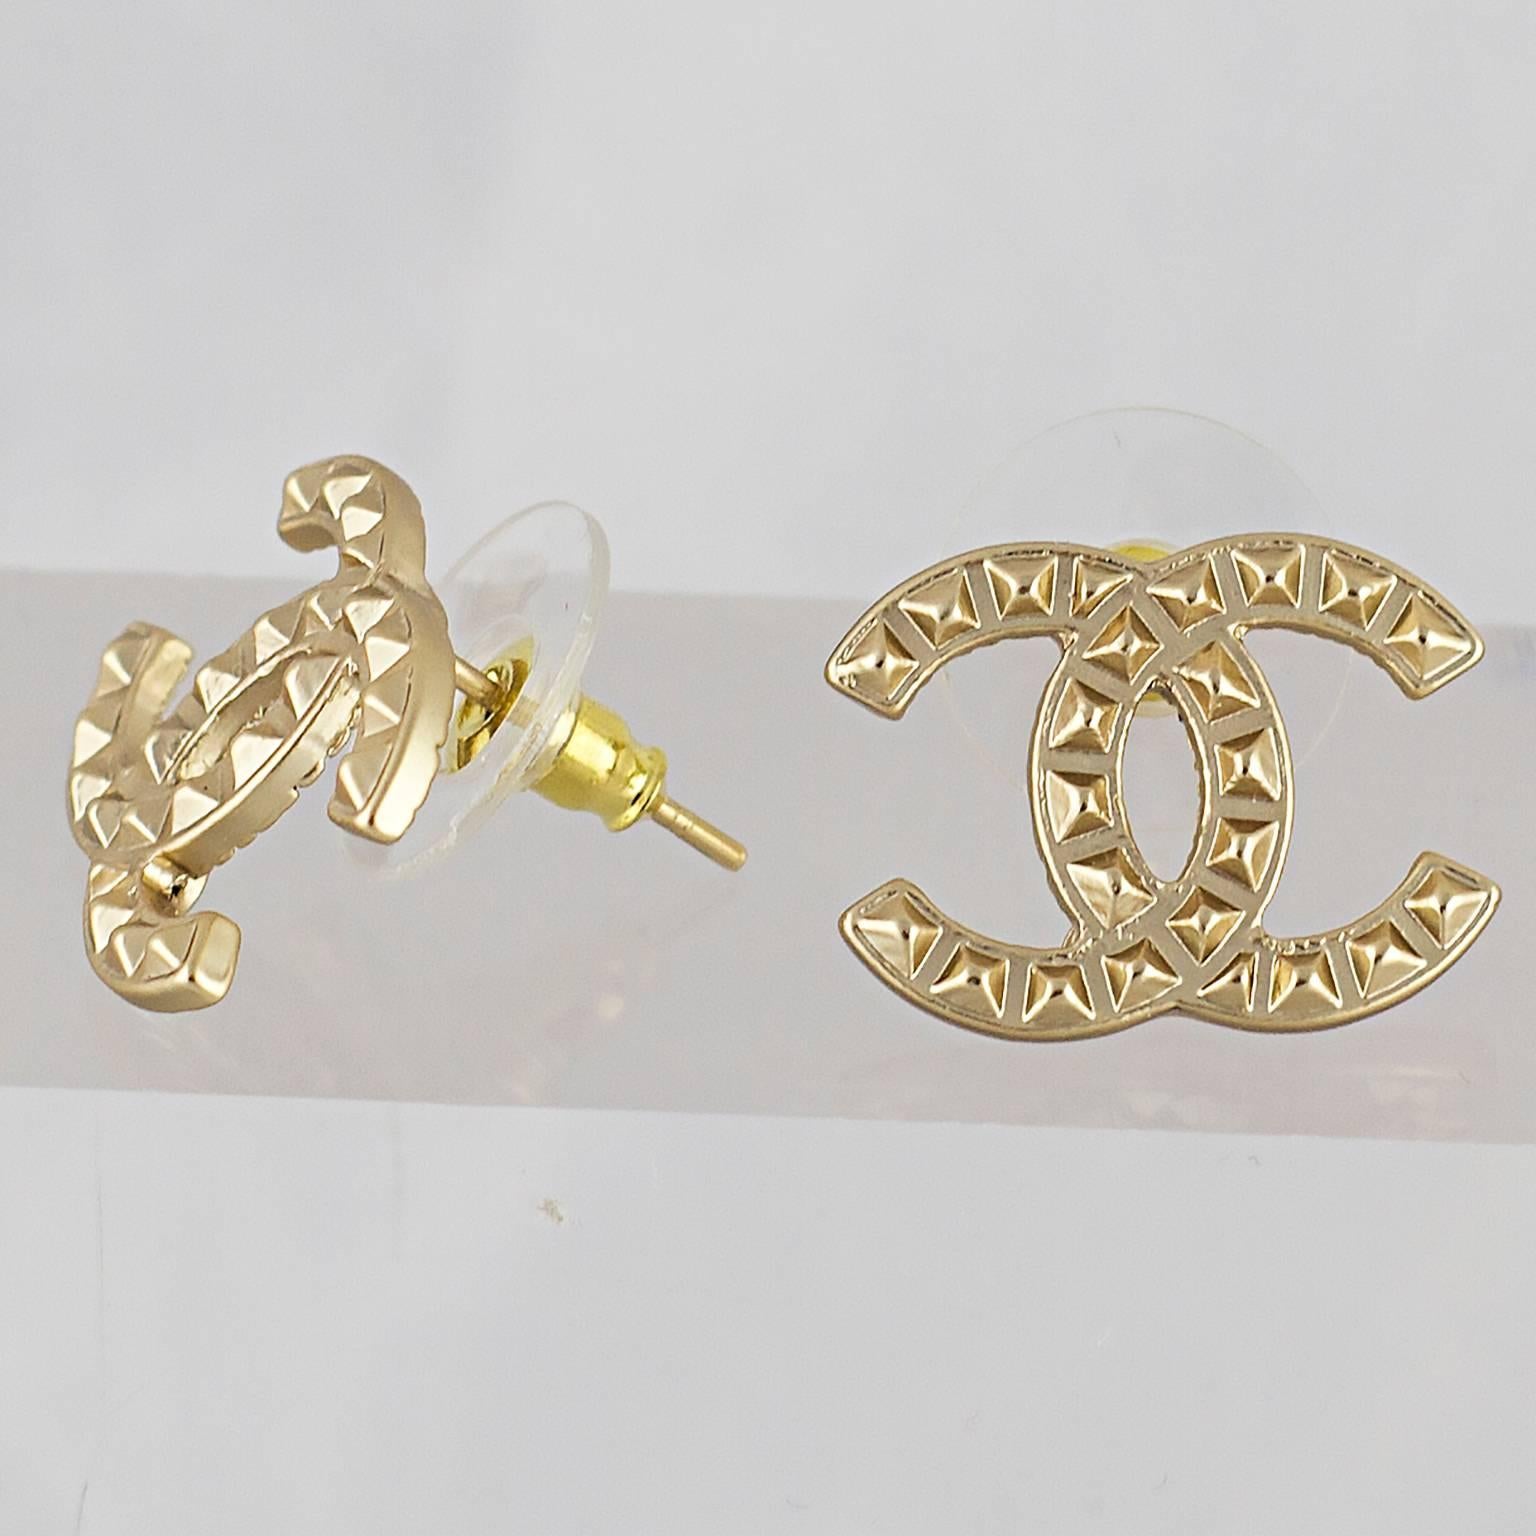 Chanel CC logo earrings for pierced ears.
Made in France for the Autumn 2016 collection.
Fully signed.
In a great condition.
Don't hesitate to contact us with queries and image requests.